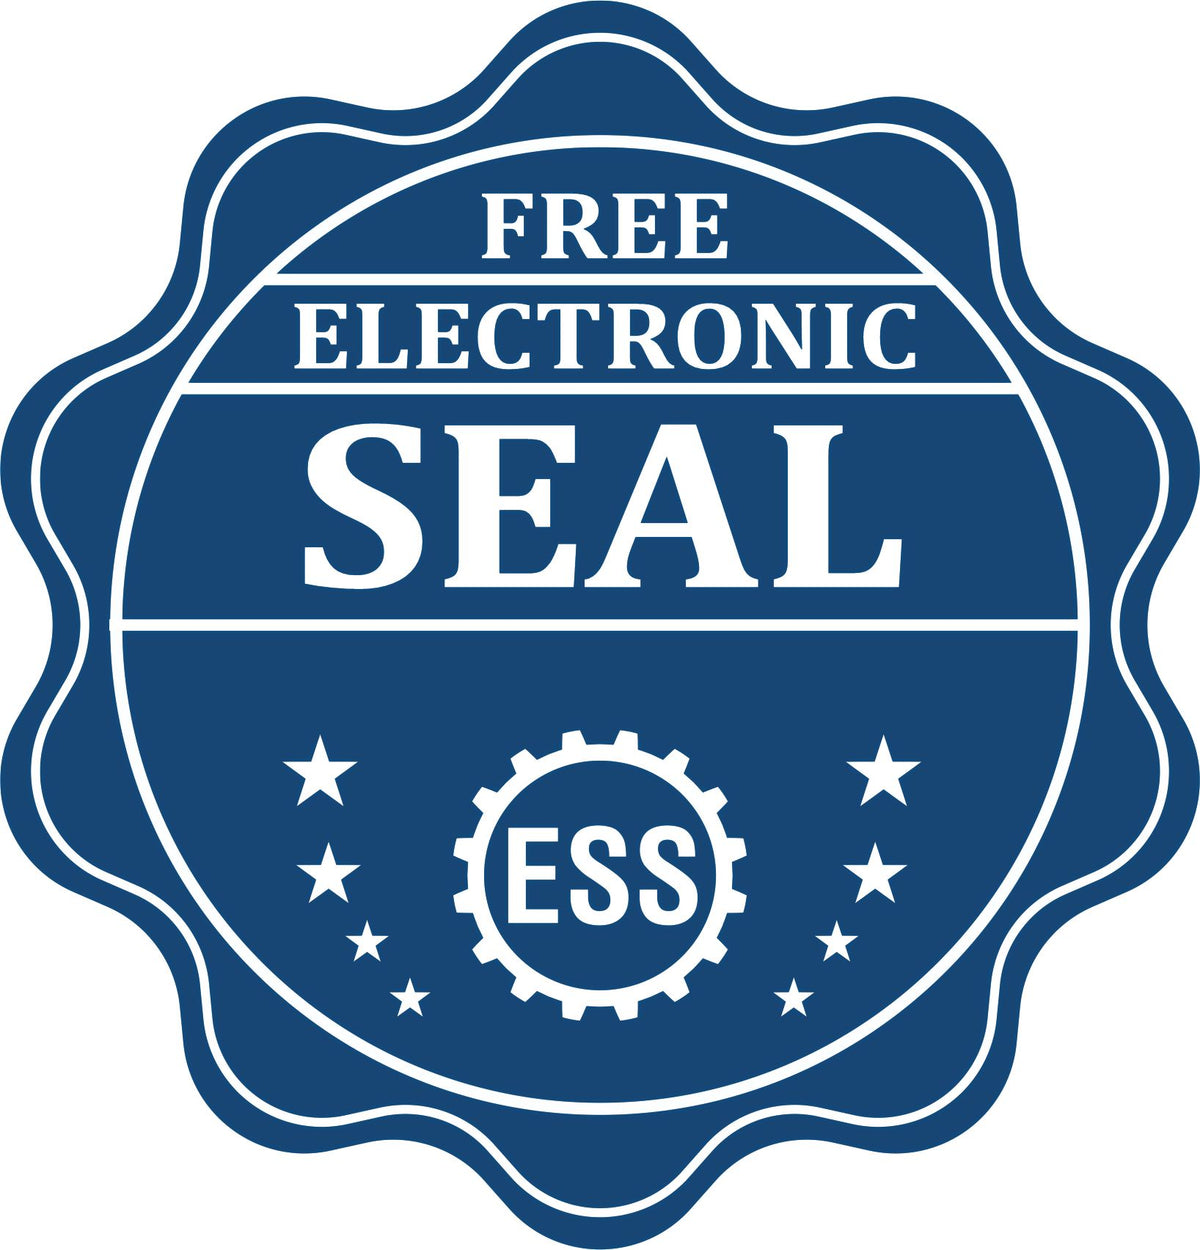 A badge showing a free electronic seal for the Slim Pre-Inked Rectangular Notary Stamp for Maryland with stars and the ESS gear on the emblem.